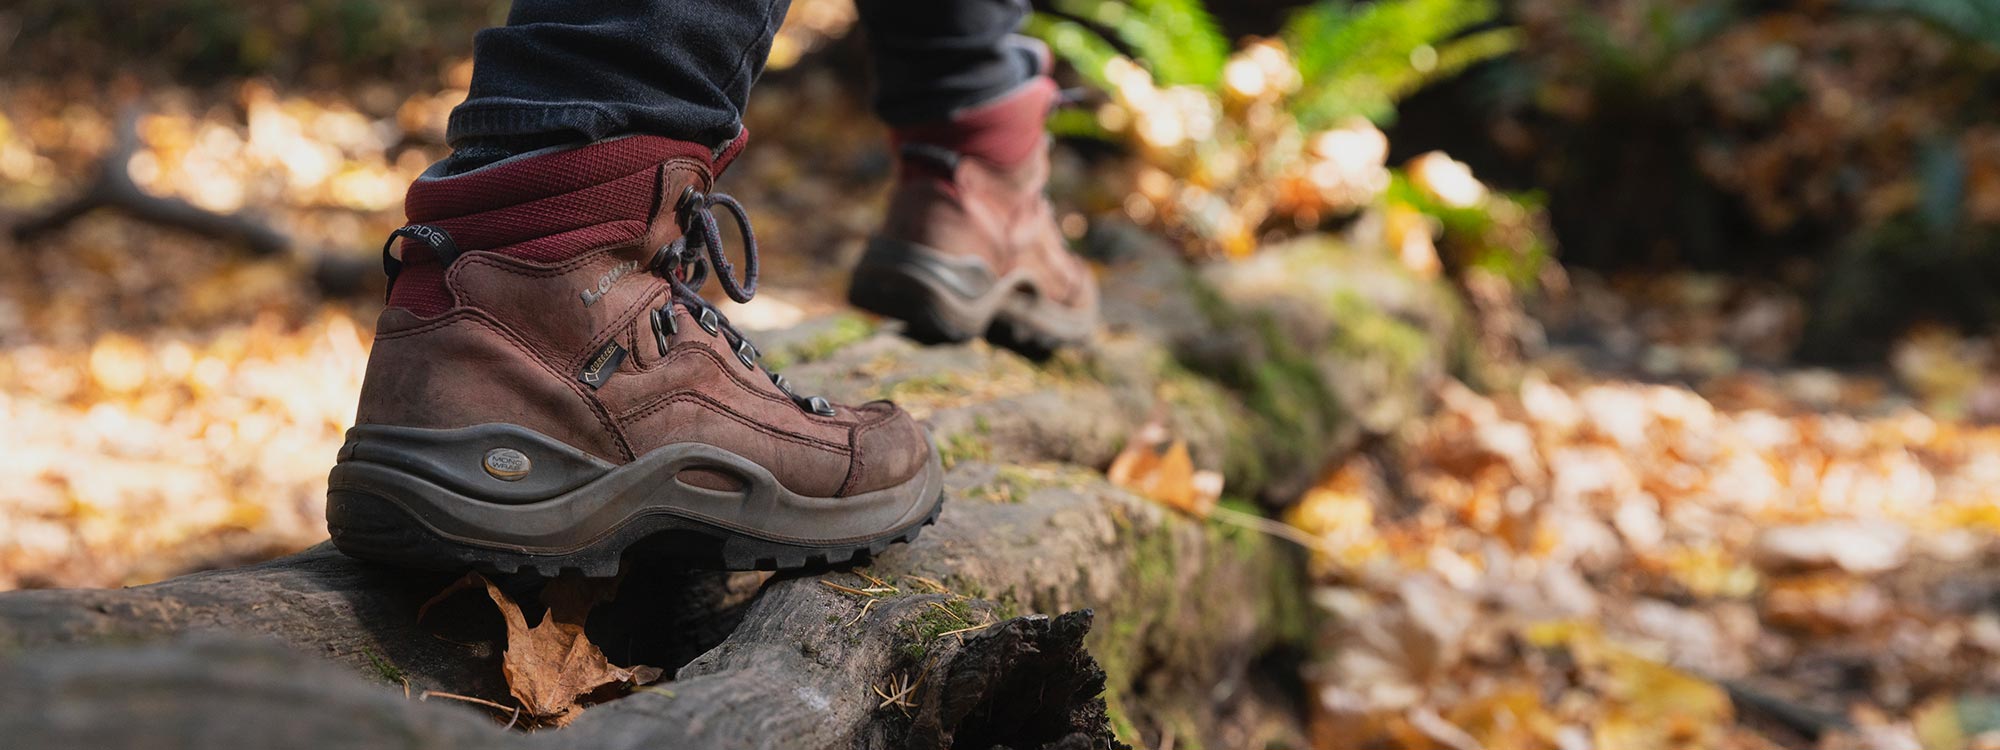 Close-up boots walking along forest log